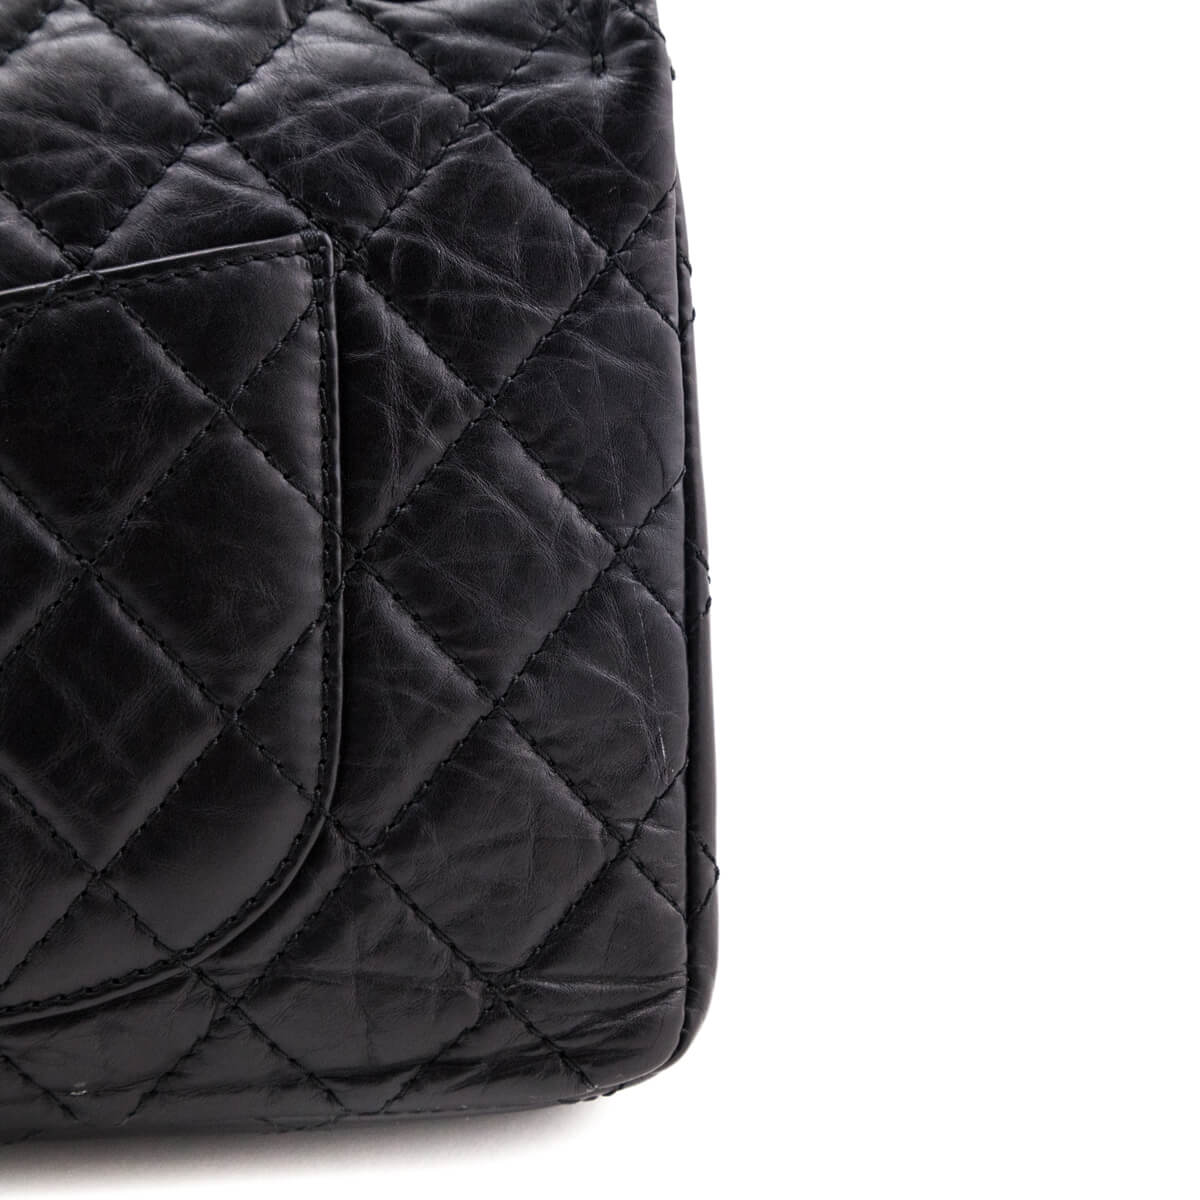 CHANEL Aged Calfskin Quilted 2.55 Reissue 226 Flap Black 1205493